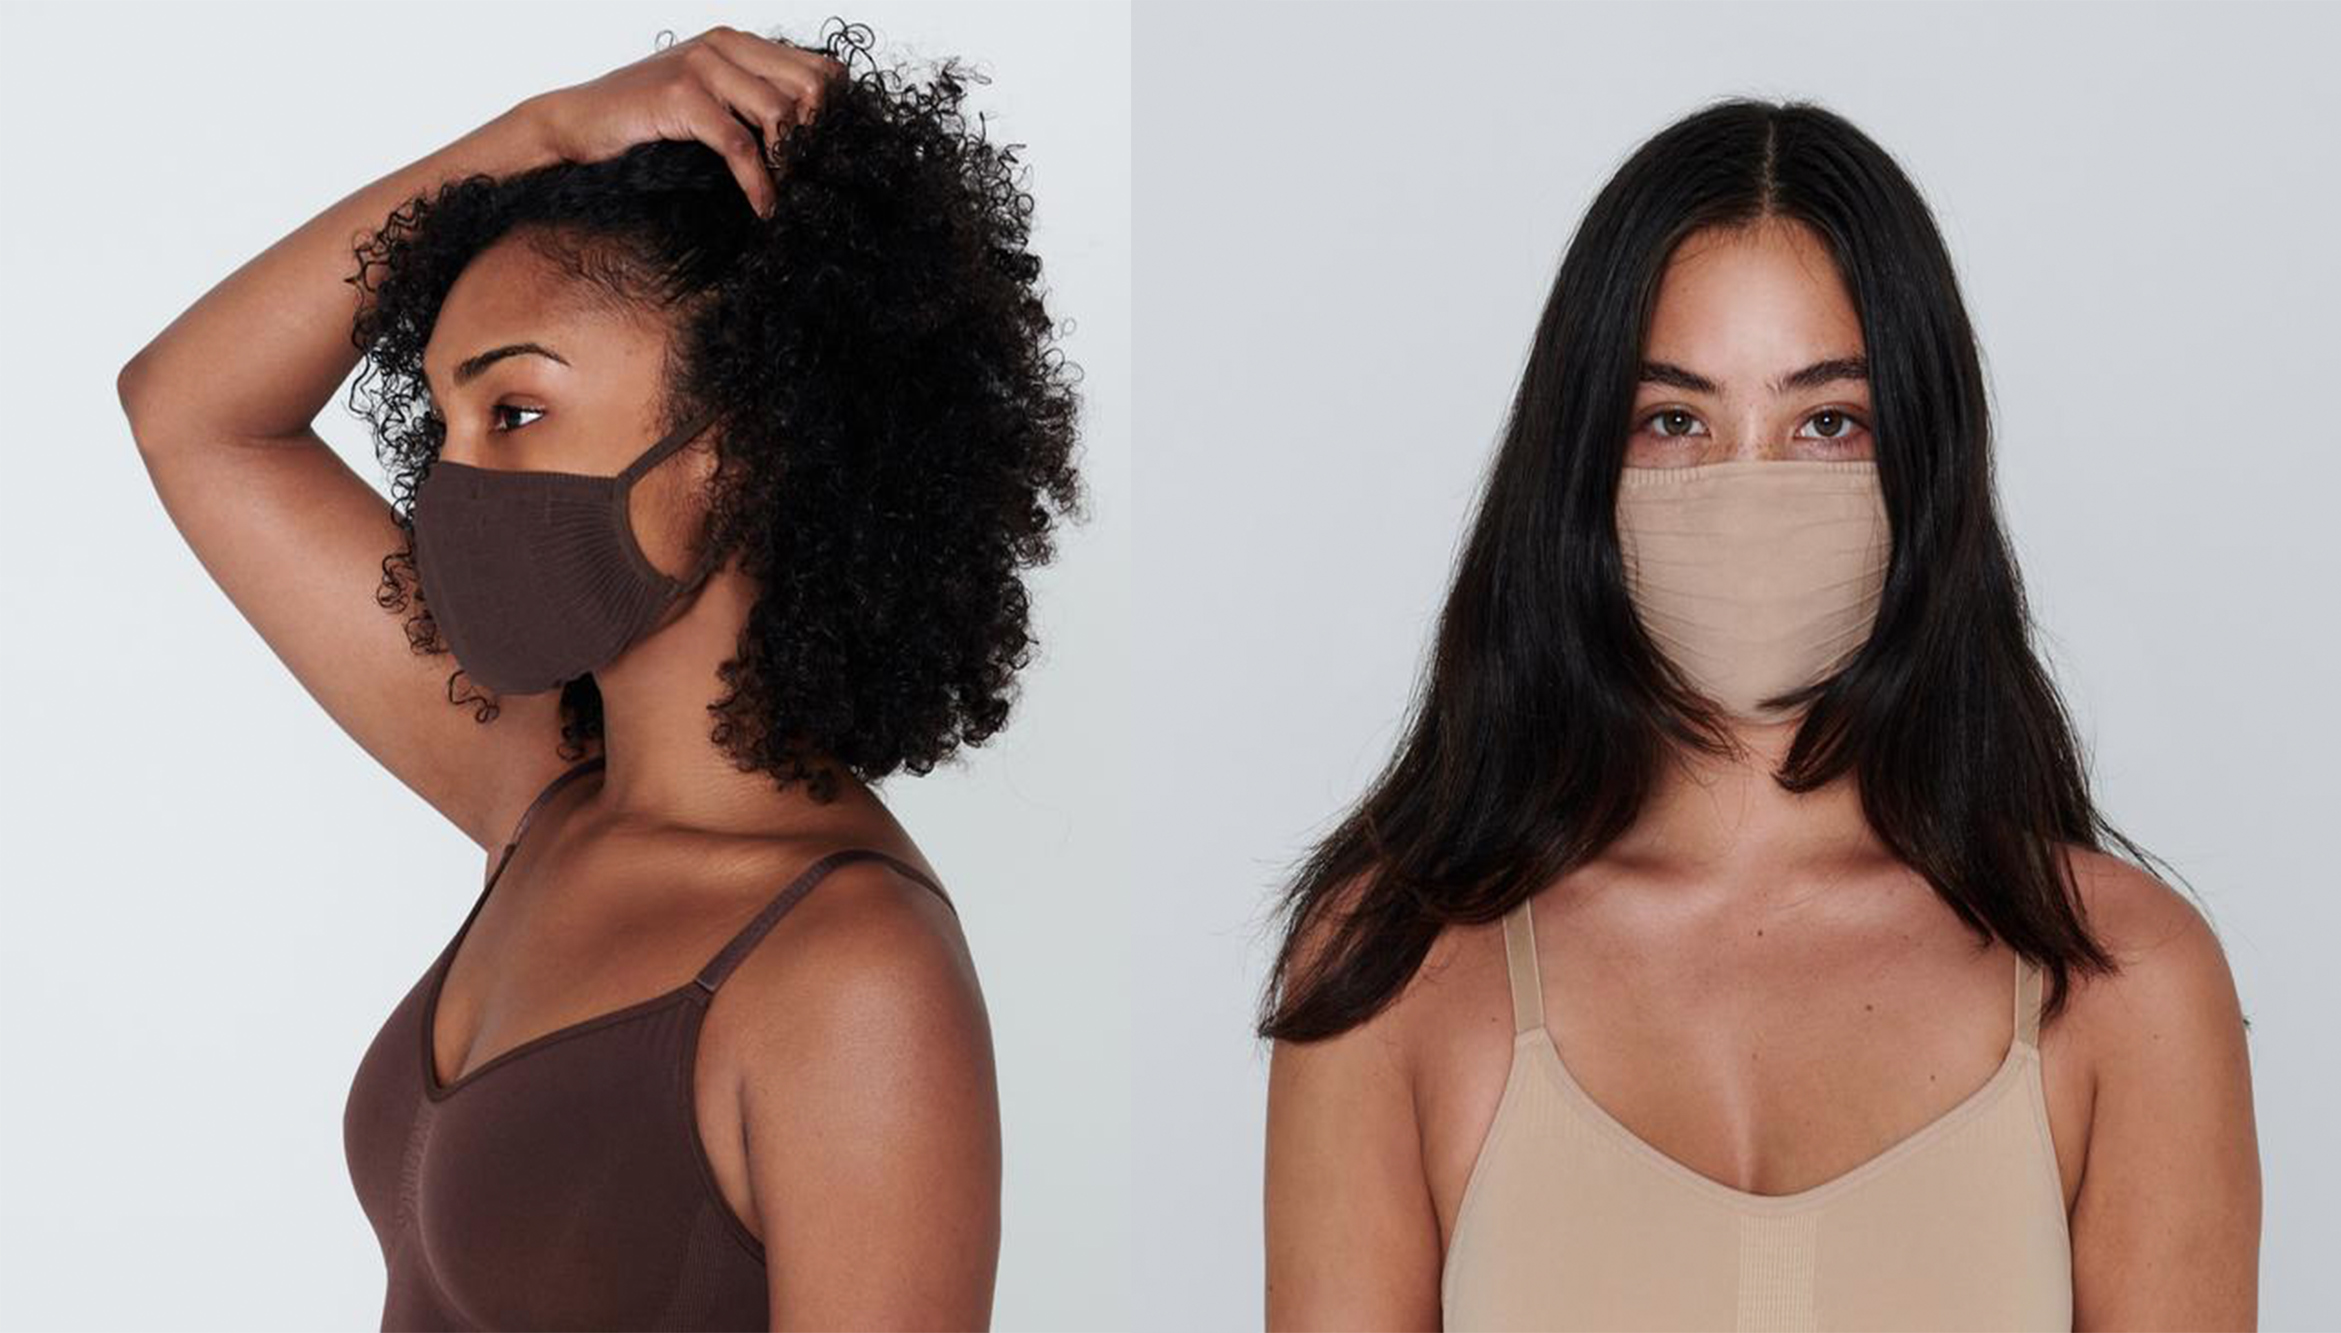 Kim Kardashian's Skims Brand Released a Face Mask Collection